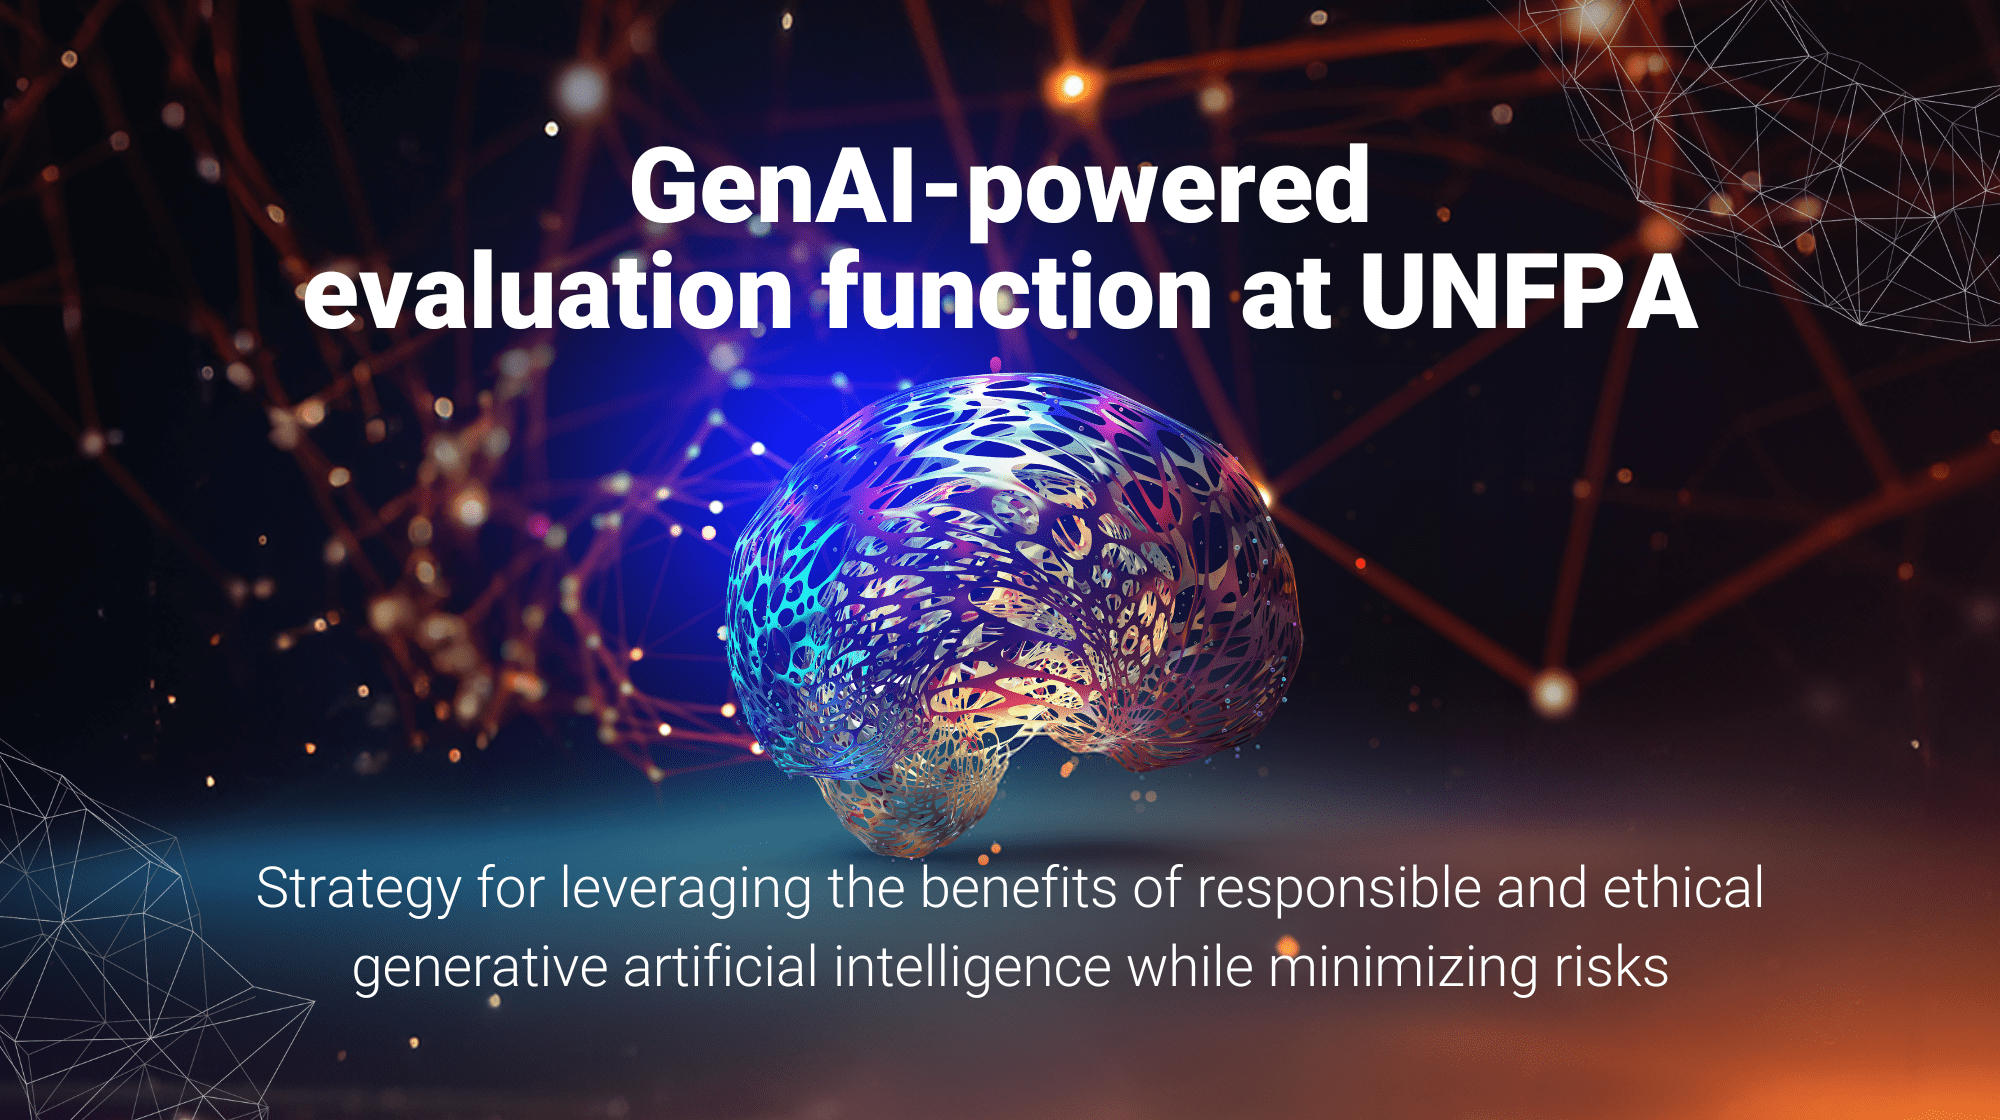 GenAI-powered evaluation function at UNFPA, Strategy for leveraging the benefits of responsible and ethical generative artificial intelligence while minimizing risks